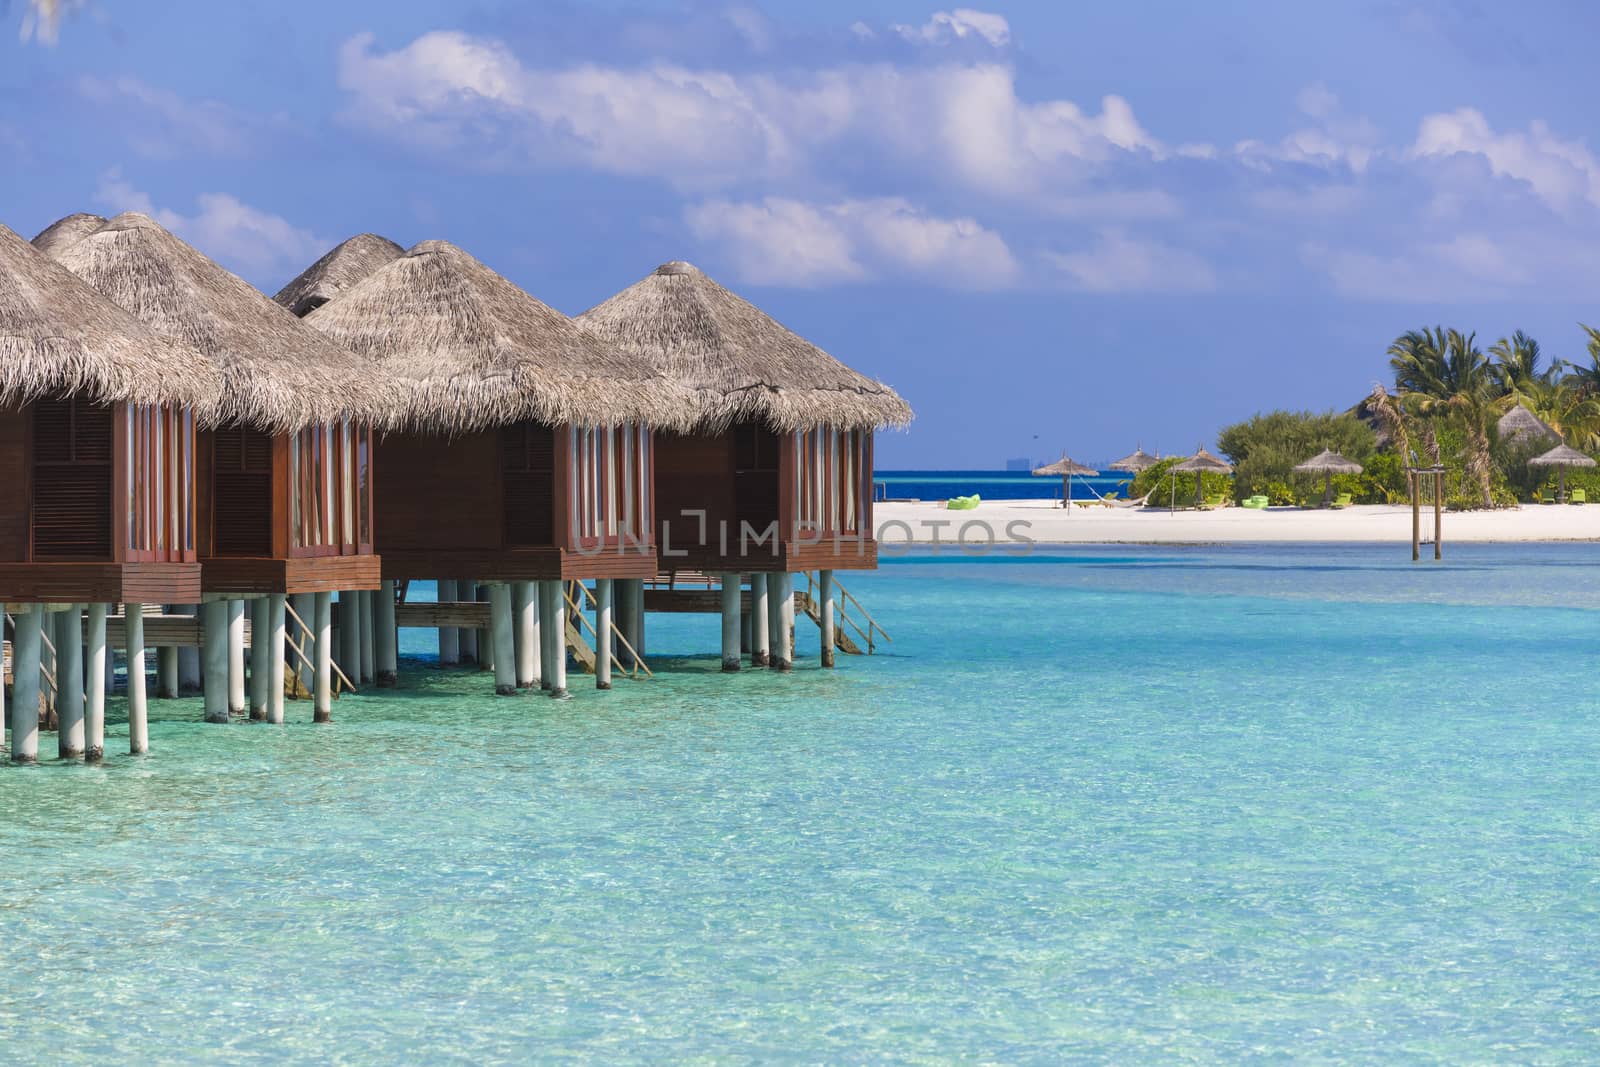 View of Over Water Bungalow in The Maldives. There is an Island  by Nemida